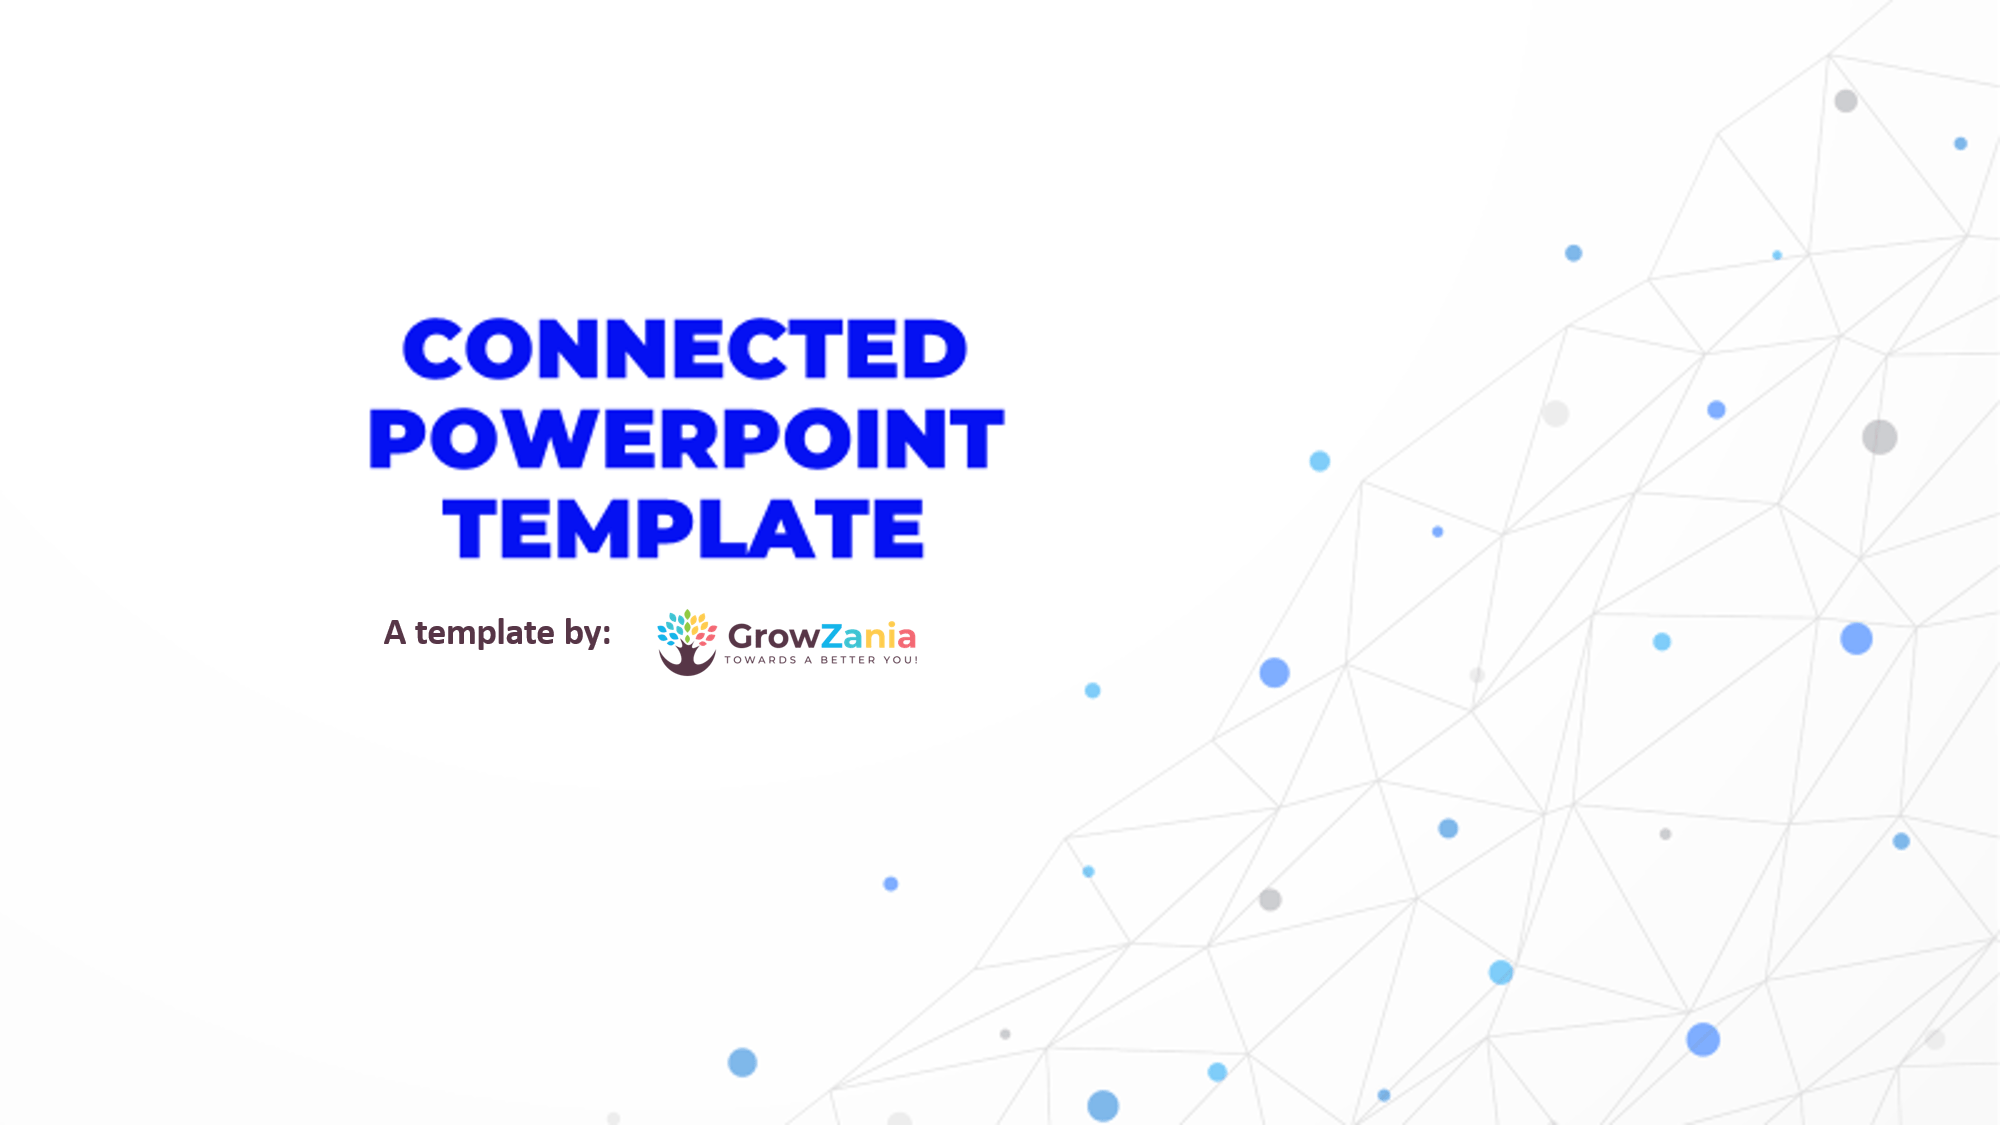 010 - Connected PowerPoint Template